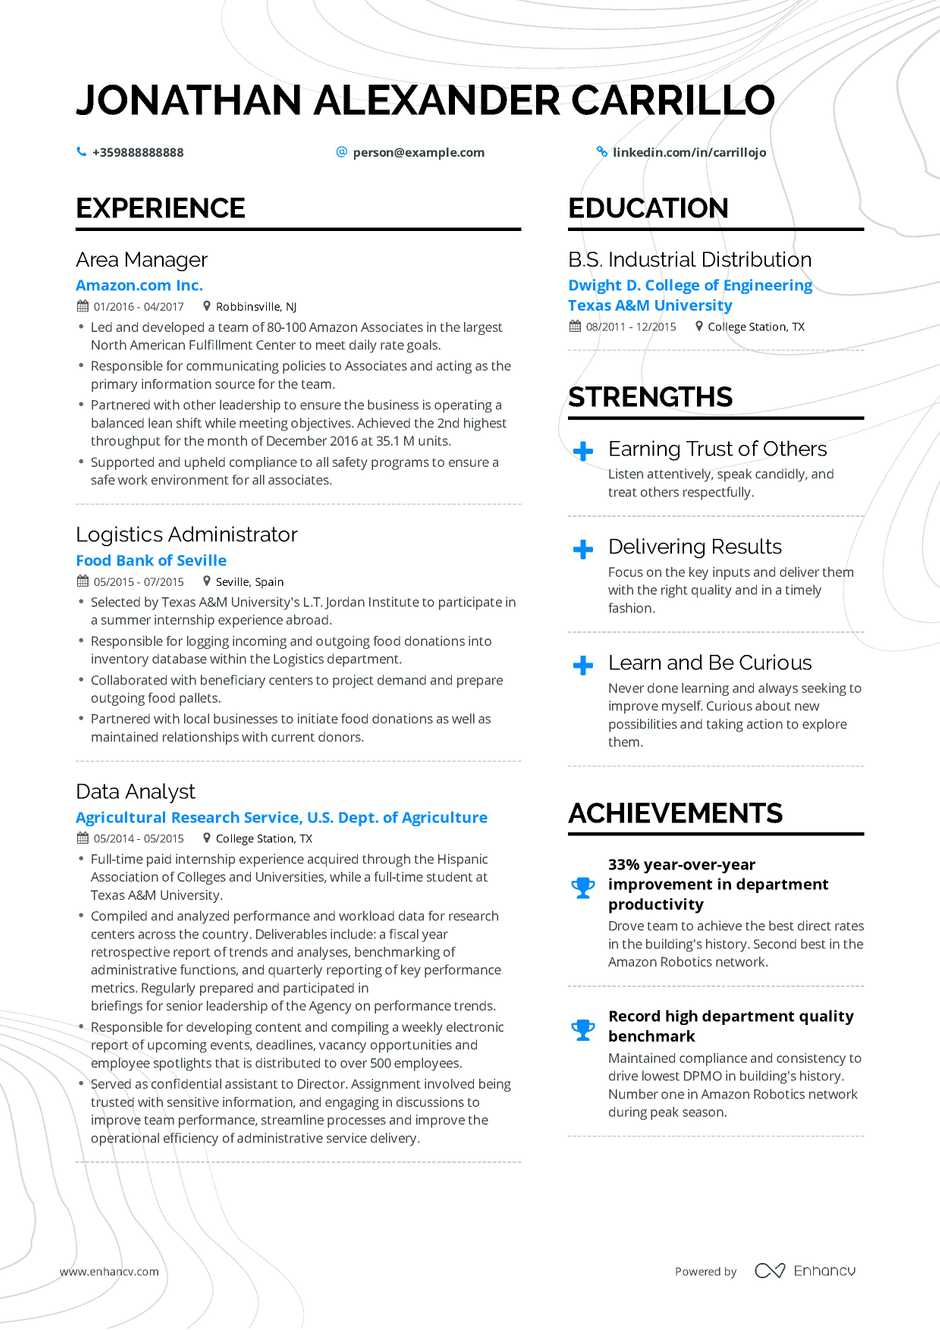 Professional Resume Examples Operations Manager Resume professional resume examples|wikiresume.com